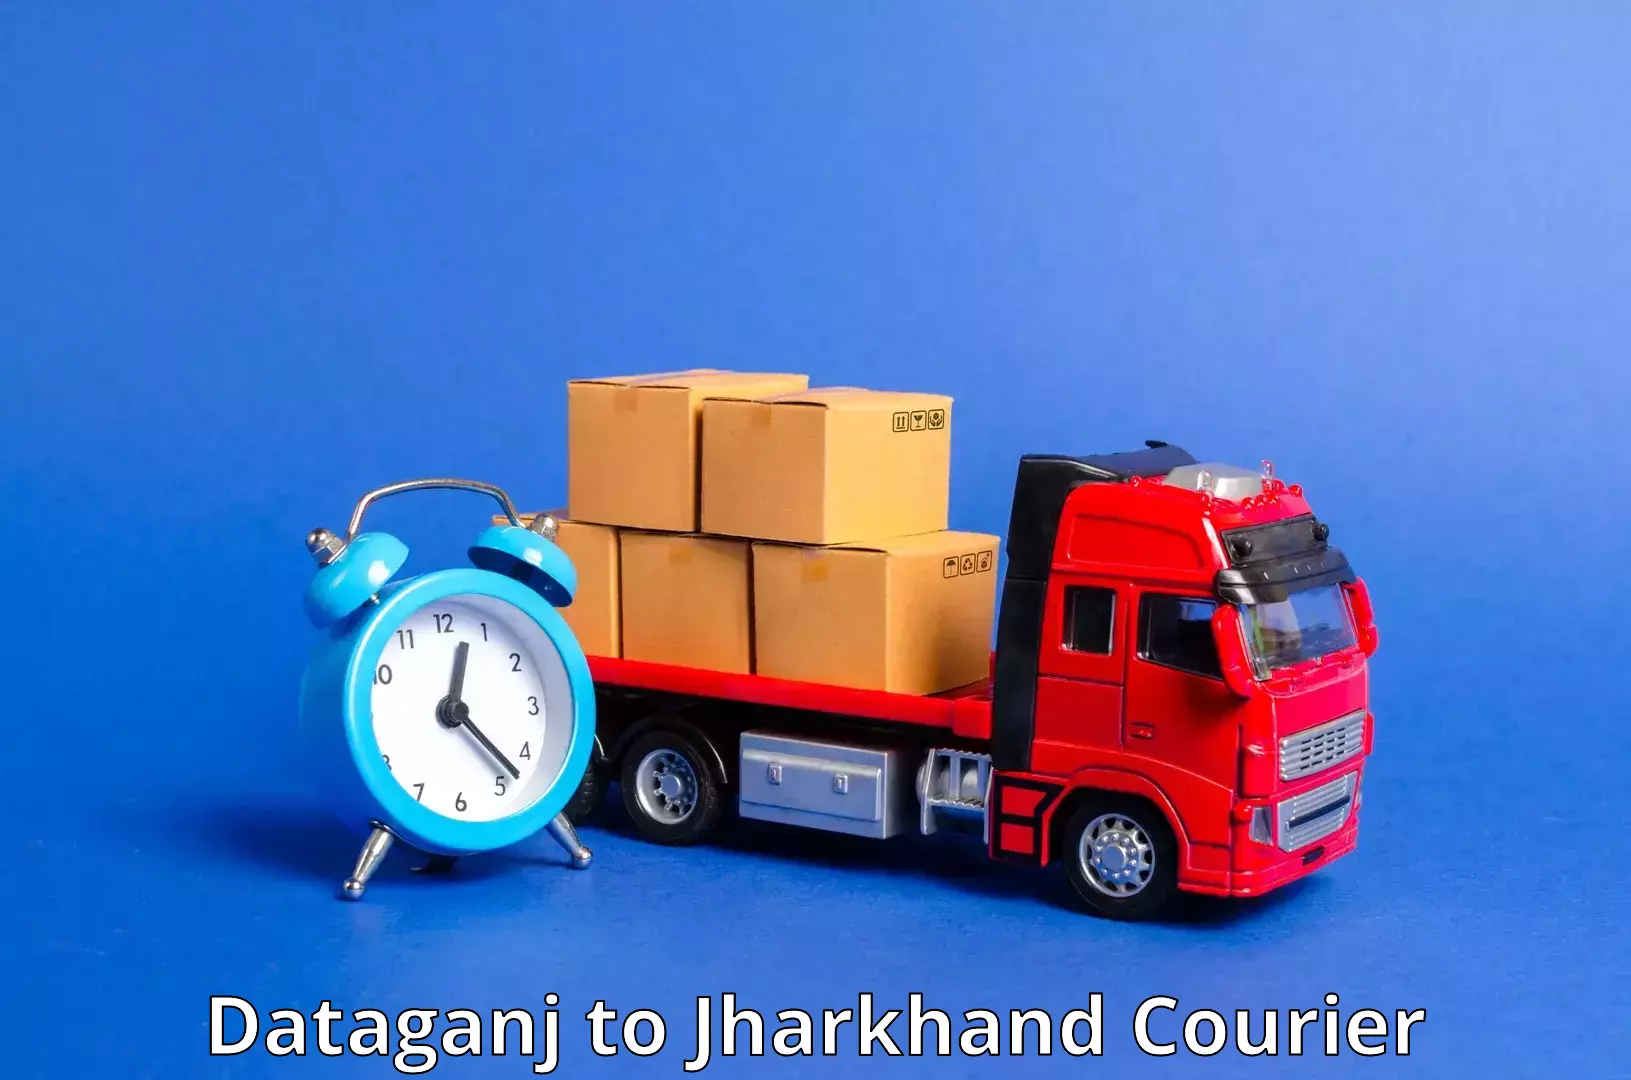 Enhanced tracking features in Dataganj to Jharkhand